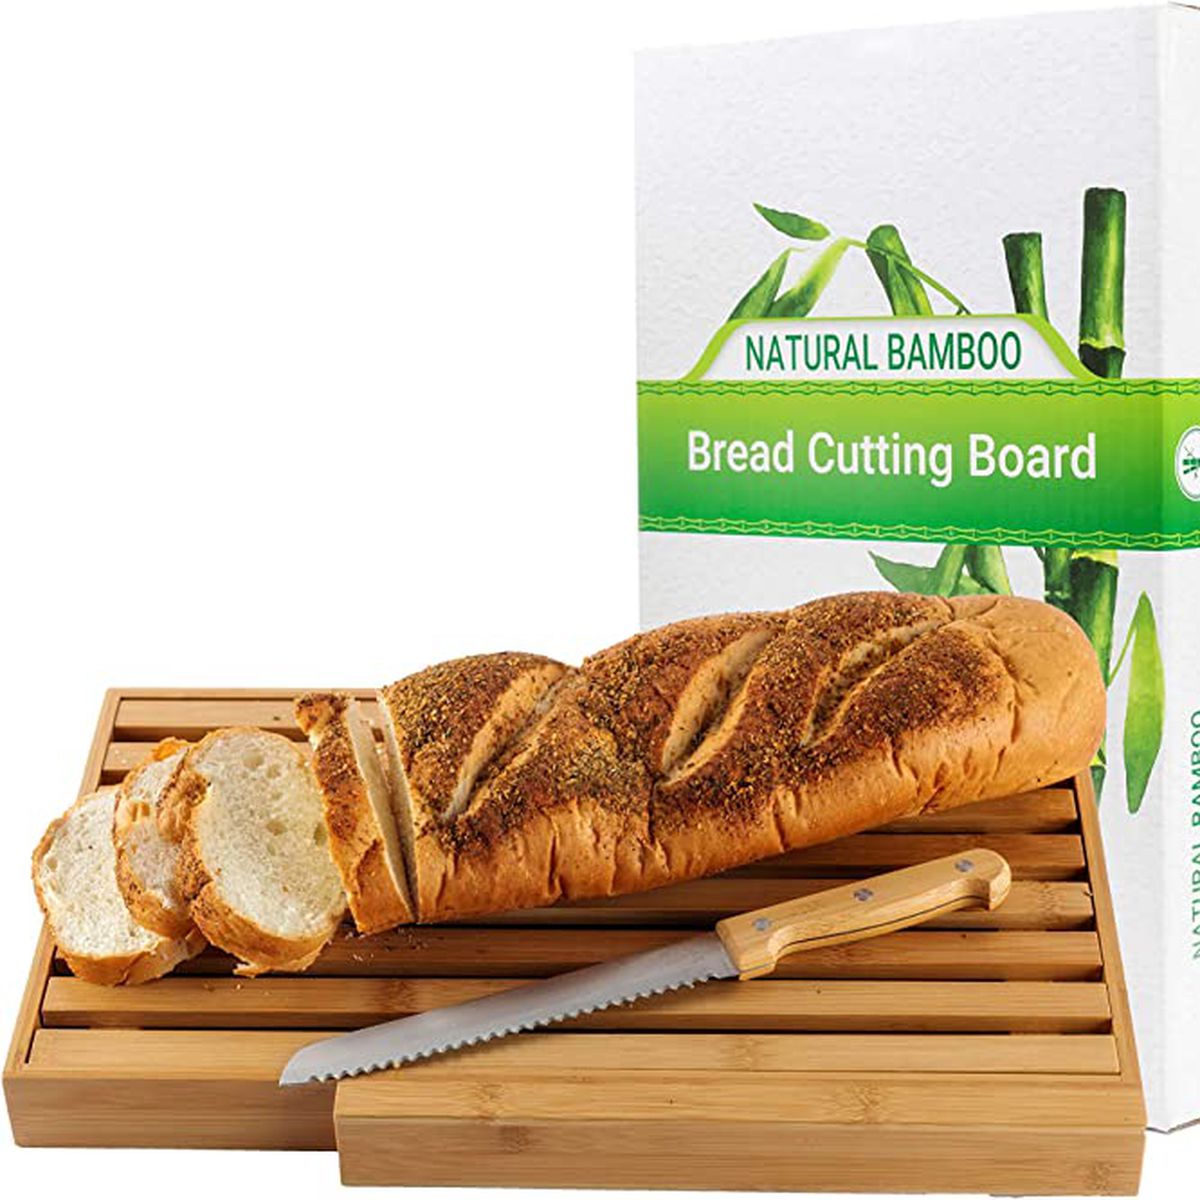 A slotted bread cutting board with a bread knife and loaf of bread